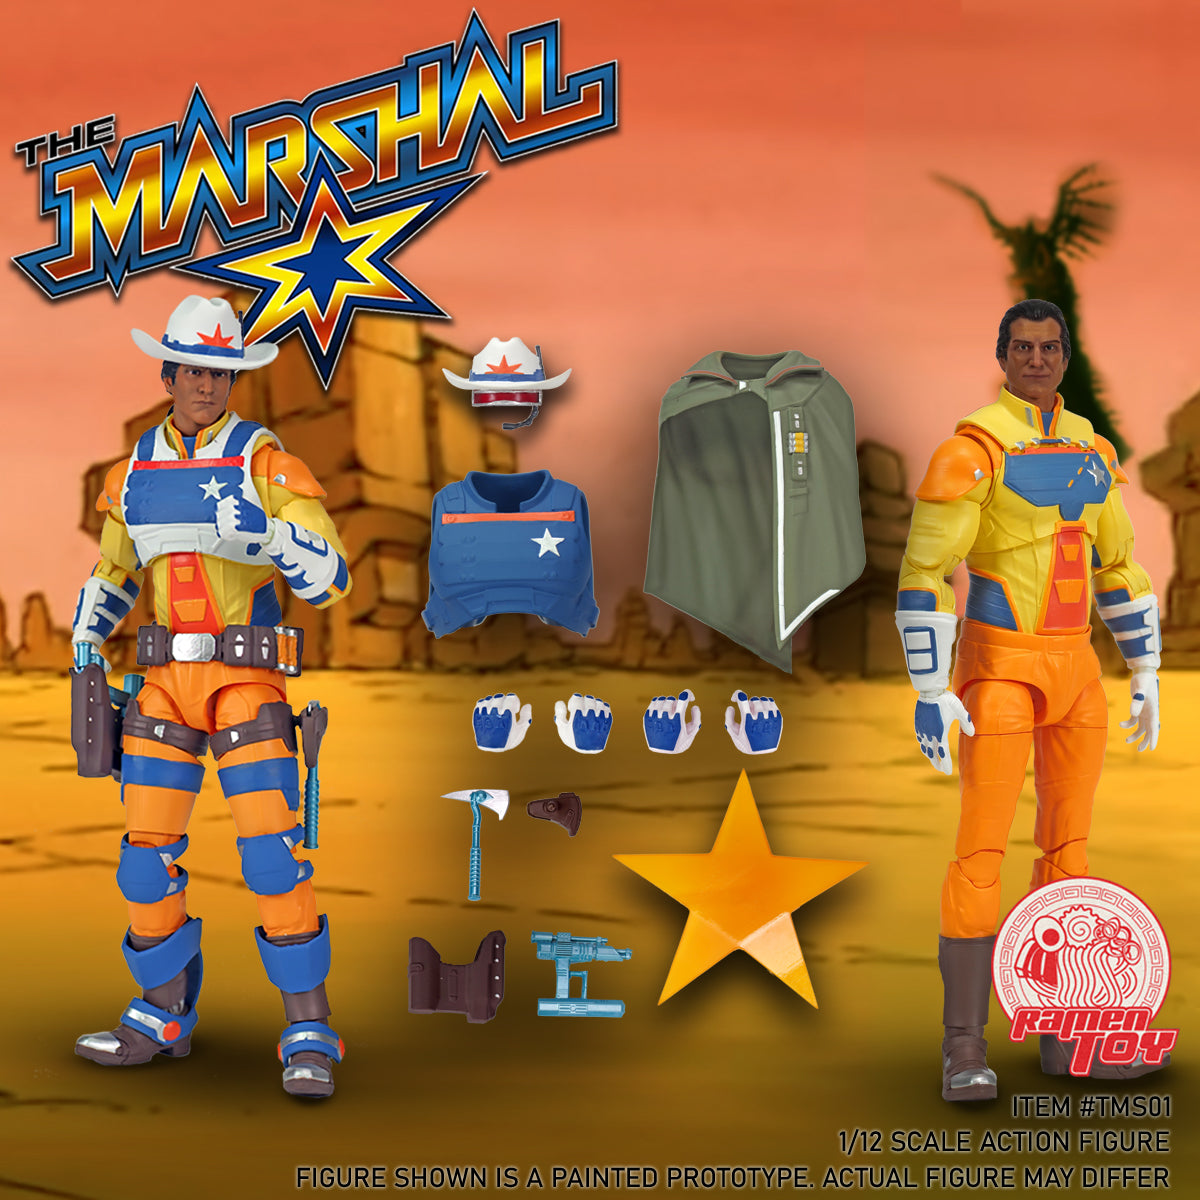 ITEM #TMS01 - The Marshal (PRE-ORDER) – Ramen Toy